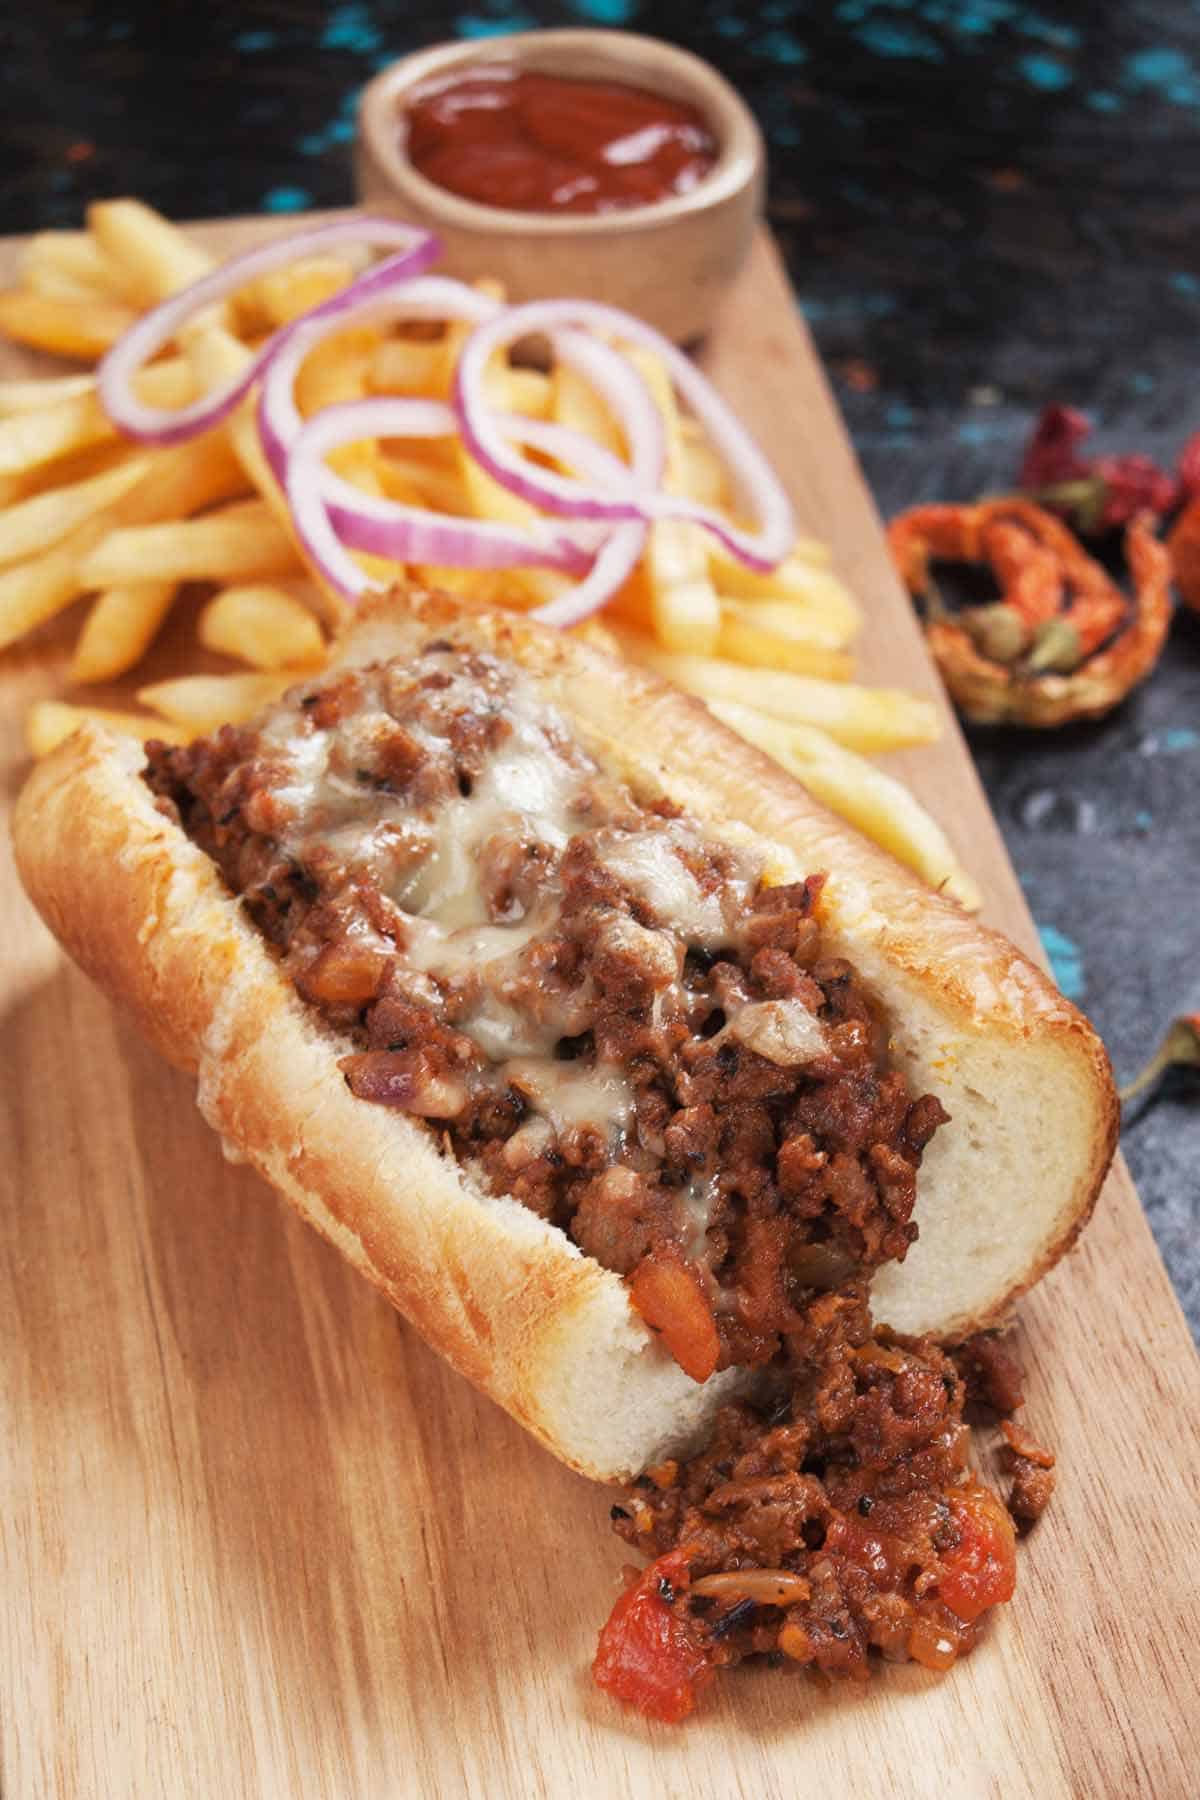 Sloppy joes in a hoagie roll with melted cheese.